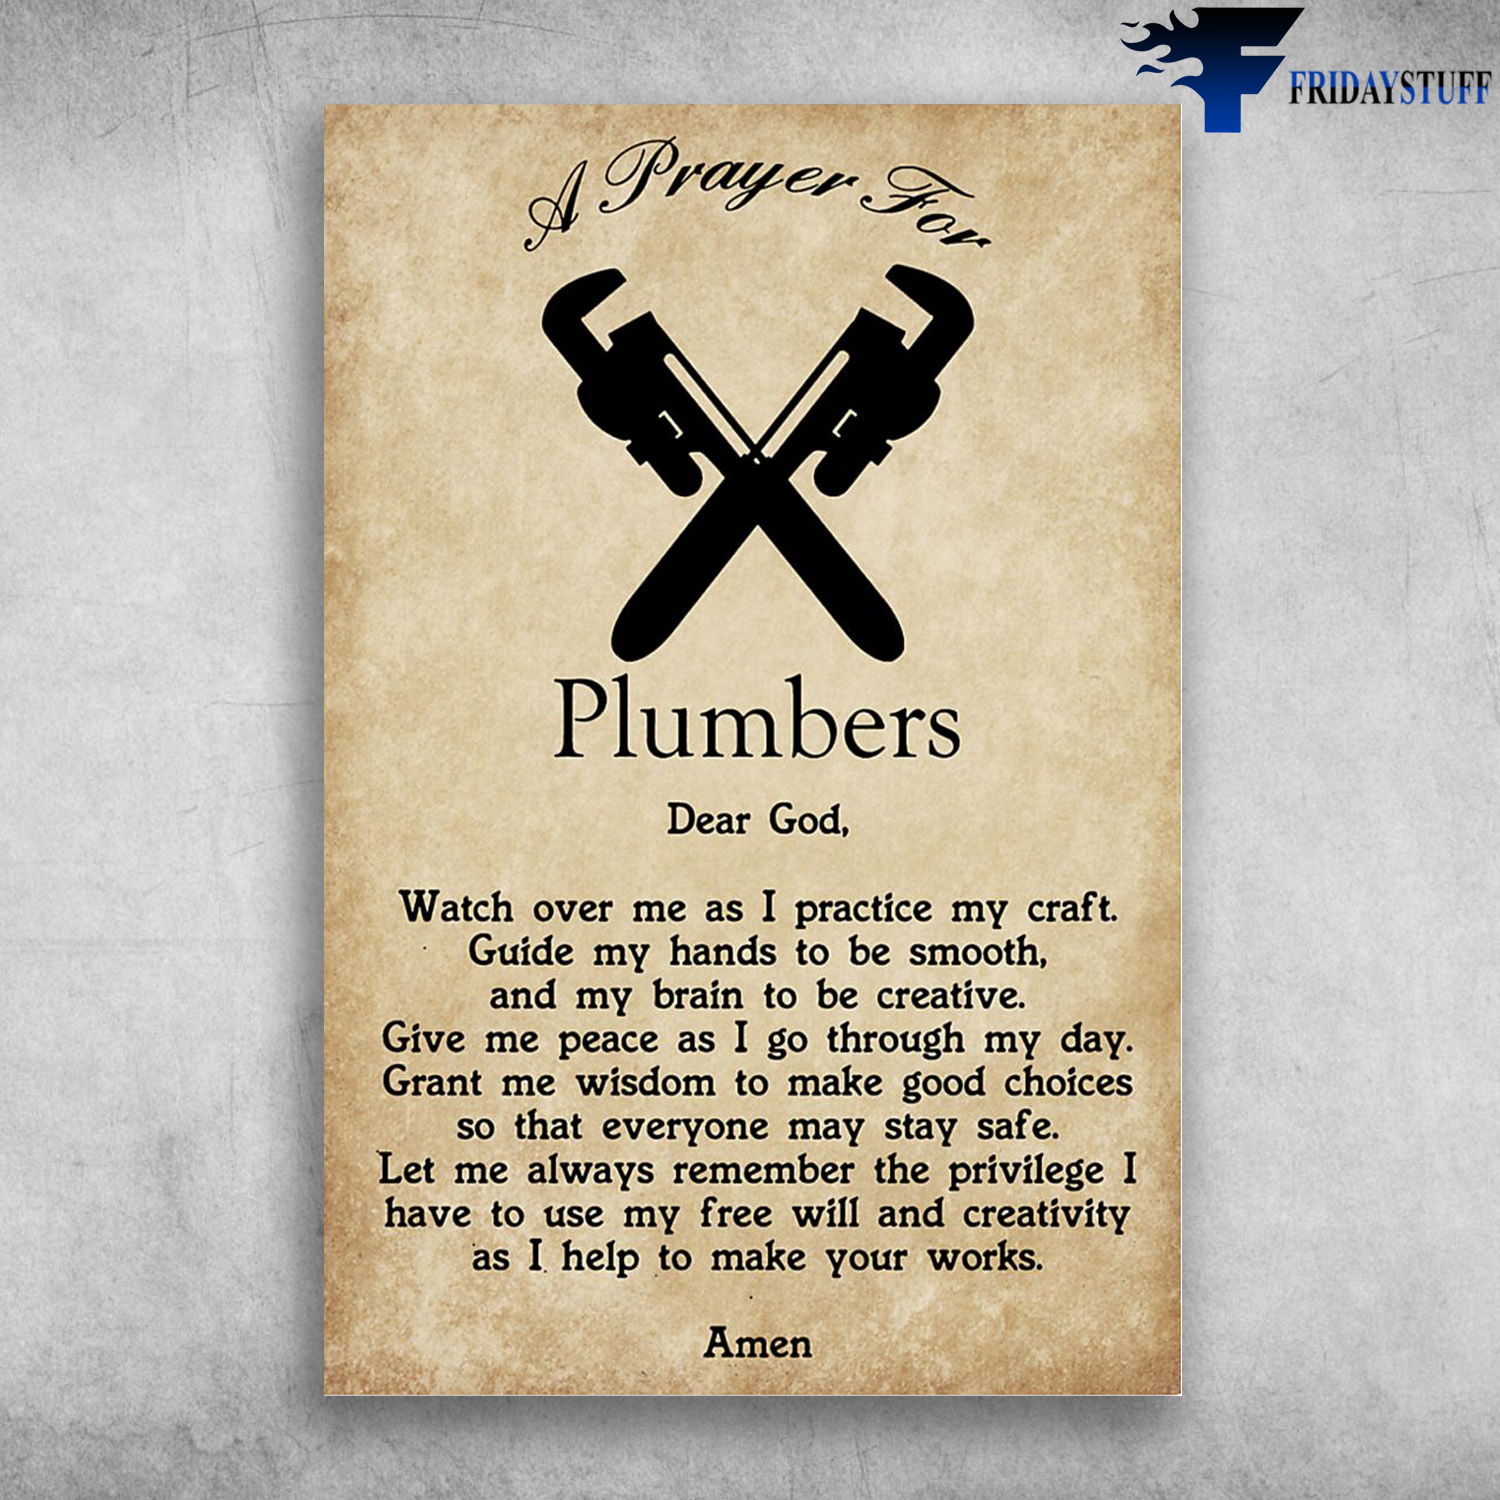 Plumber - A Prayer For Plumbers, Dear God, Watch Over Me As I Practice My Craft, Guide My Hands To Be Smooth, And My Brain To Be Creative, Give Me Peace As I Go Through My Day